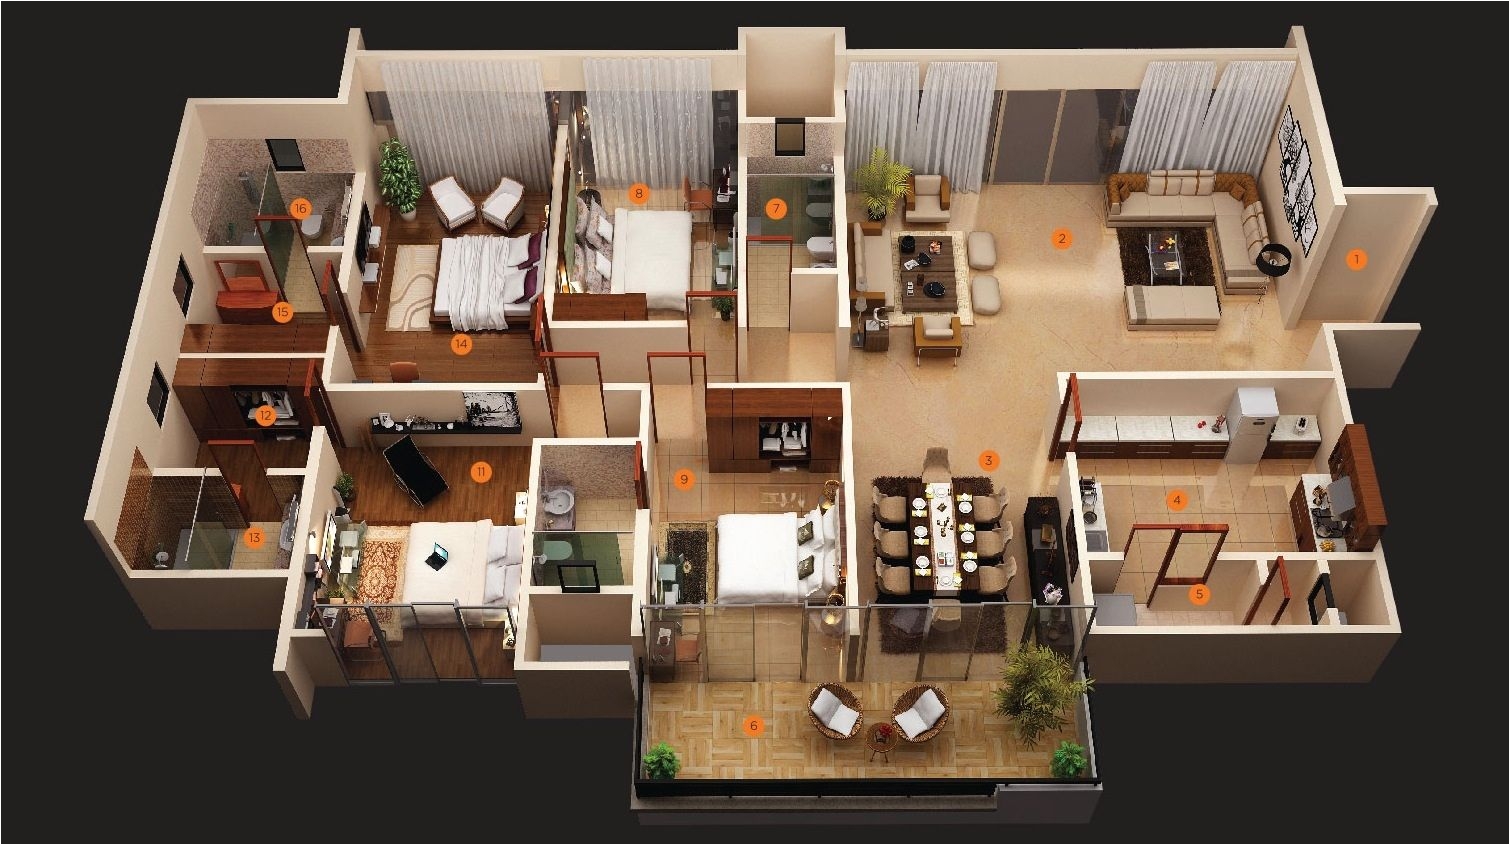 after having covered 50 floor plans each of studios 1 bedroom 2 bedroom and 3 bedroom apartments we move on to bigger options a four bedroom apartment